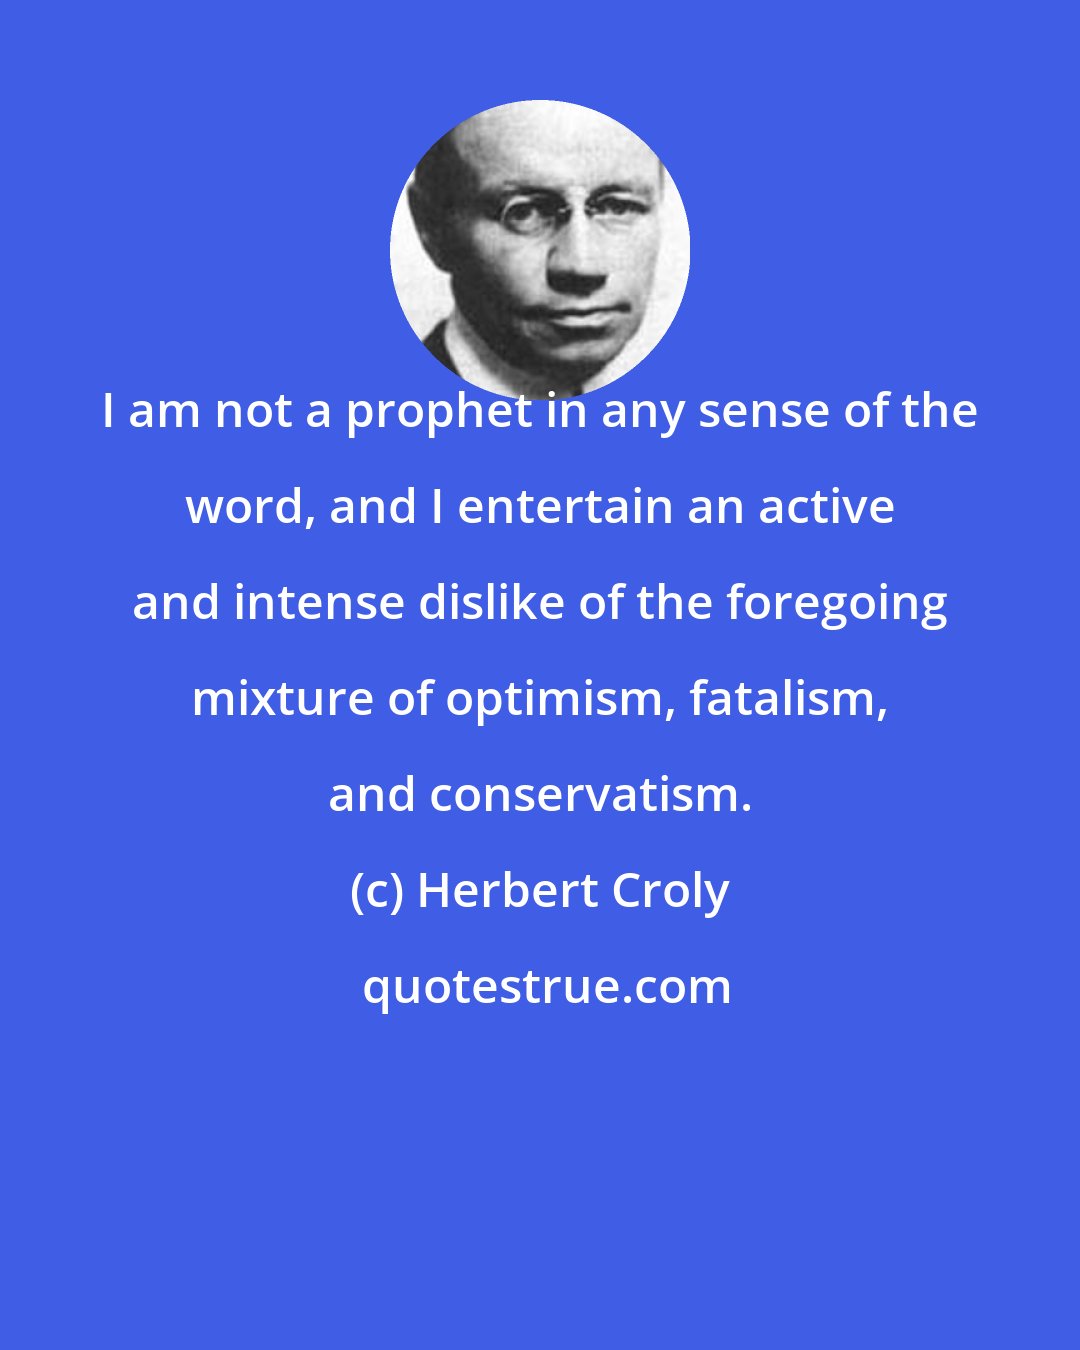 Herbert Croly: I am not a prophet in any sense of the word, and I entertain an active and intense dislike of the foregoing mixture of optimism, fatalism, and conservatism.